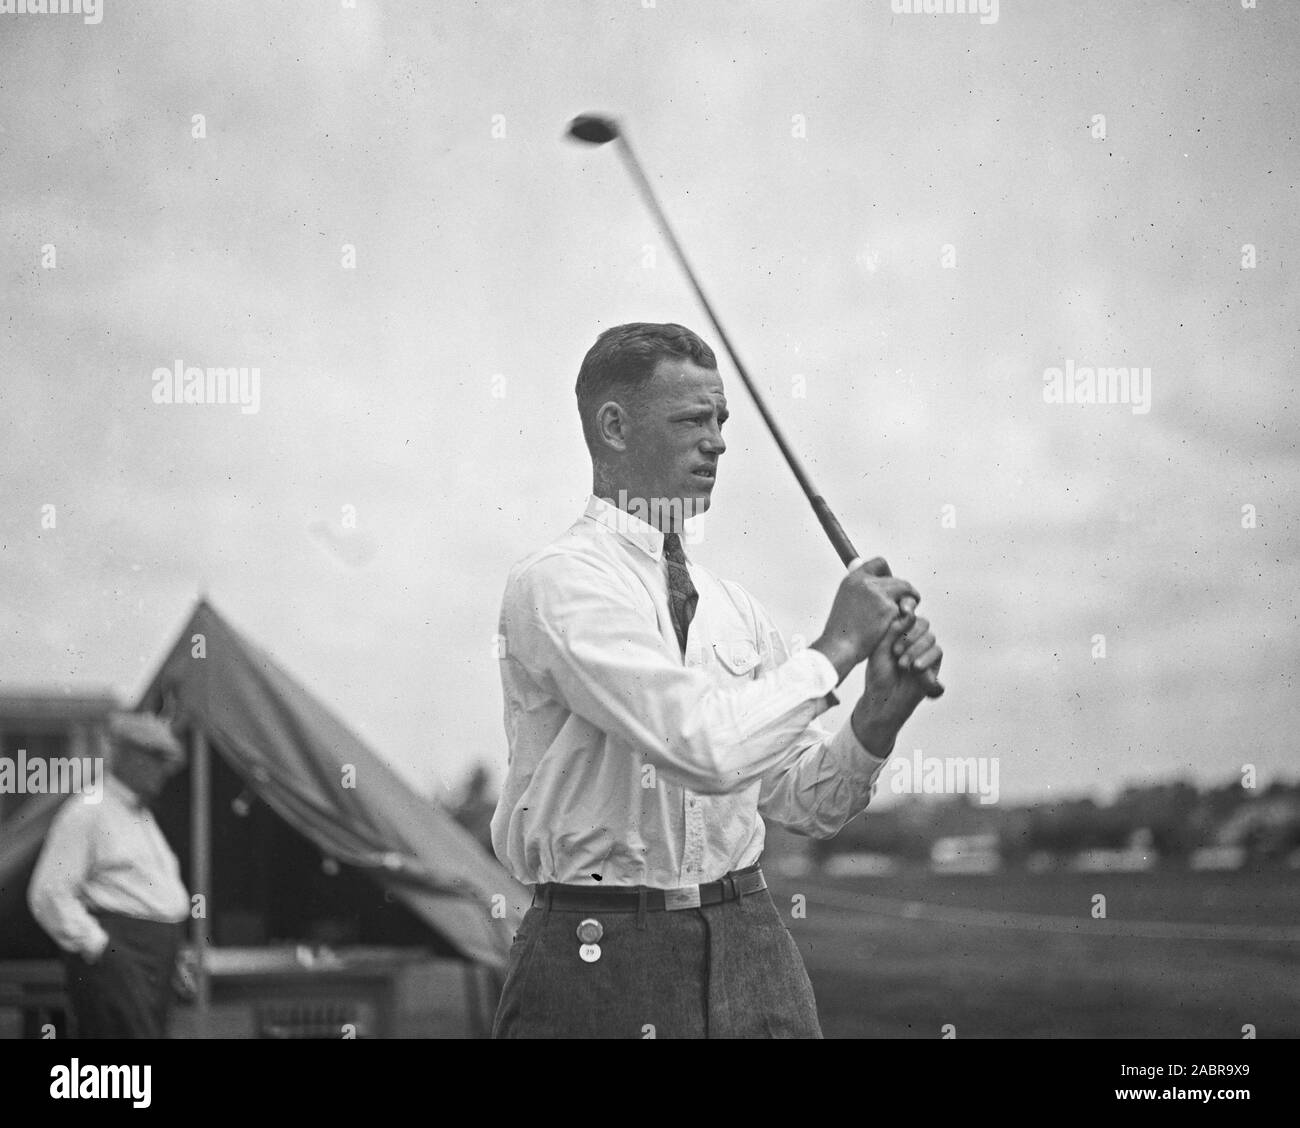 Vintage Golfing - Photo taken at the Second Annual American Public Links championship golf tournament held at East Potomac Park, Washington, D.C. - June 1923 Stock Photo